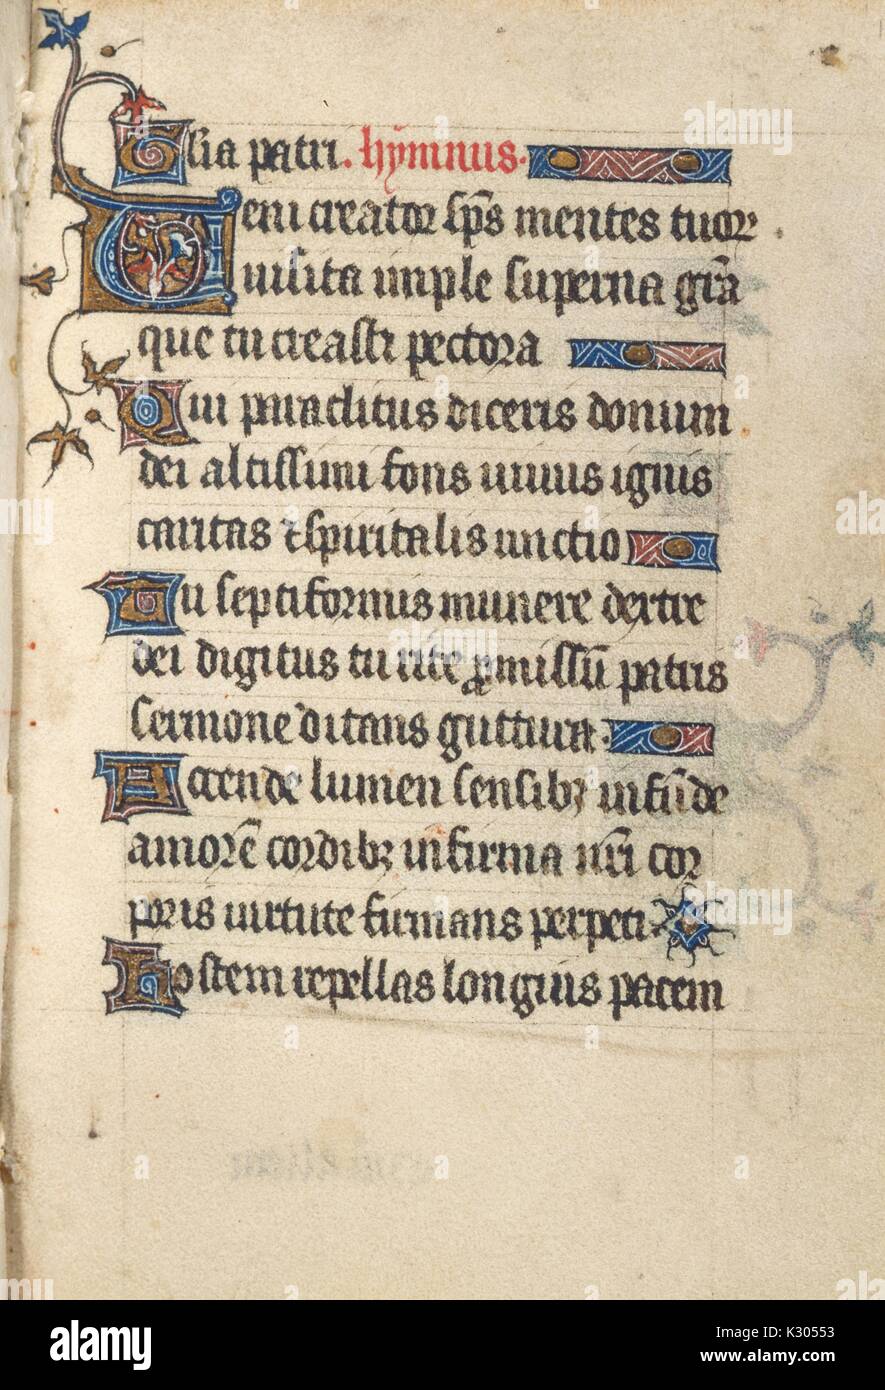 Illuminated manuscript page of prayer in Latin with ornamental initials, from the 'Gloria patri hymnus, ' a 15th century Latin book of hours, 2013. Stock Photo